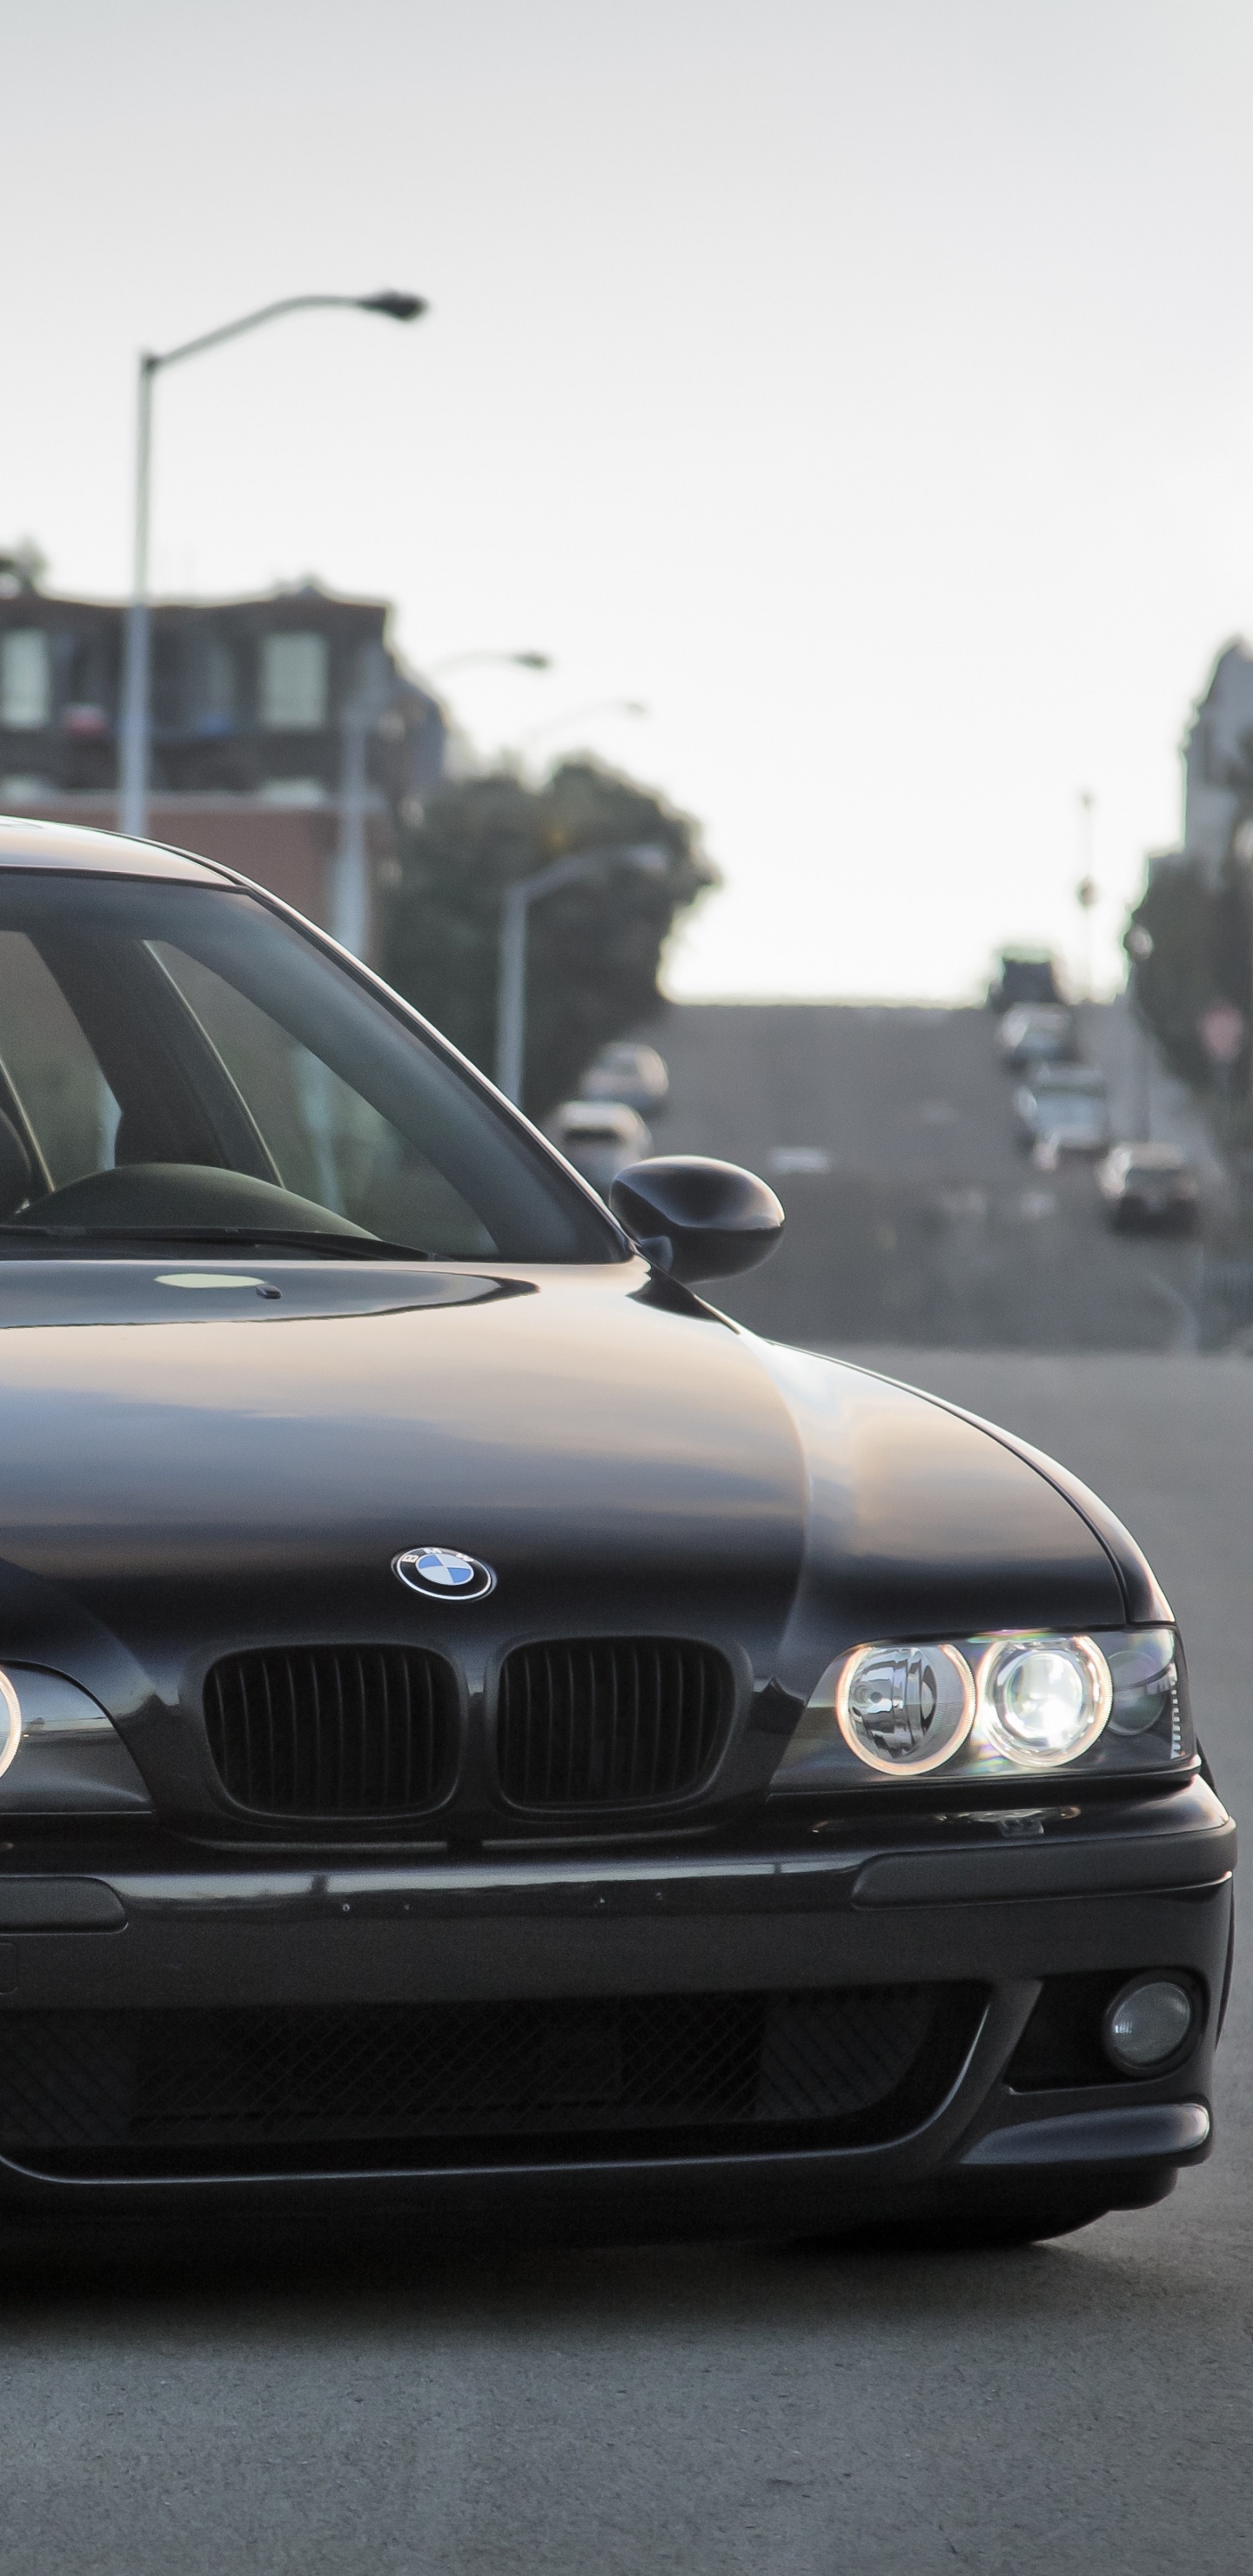 Black Bmw m 3 on Road During Daytime. Wallpaper in 1440x2960 Resolution